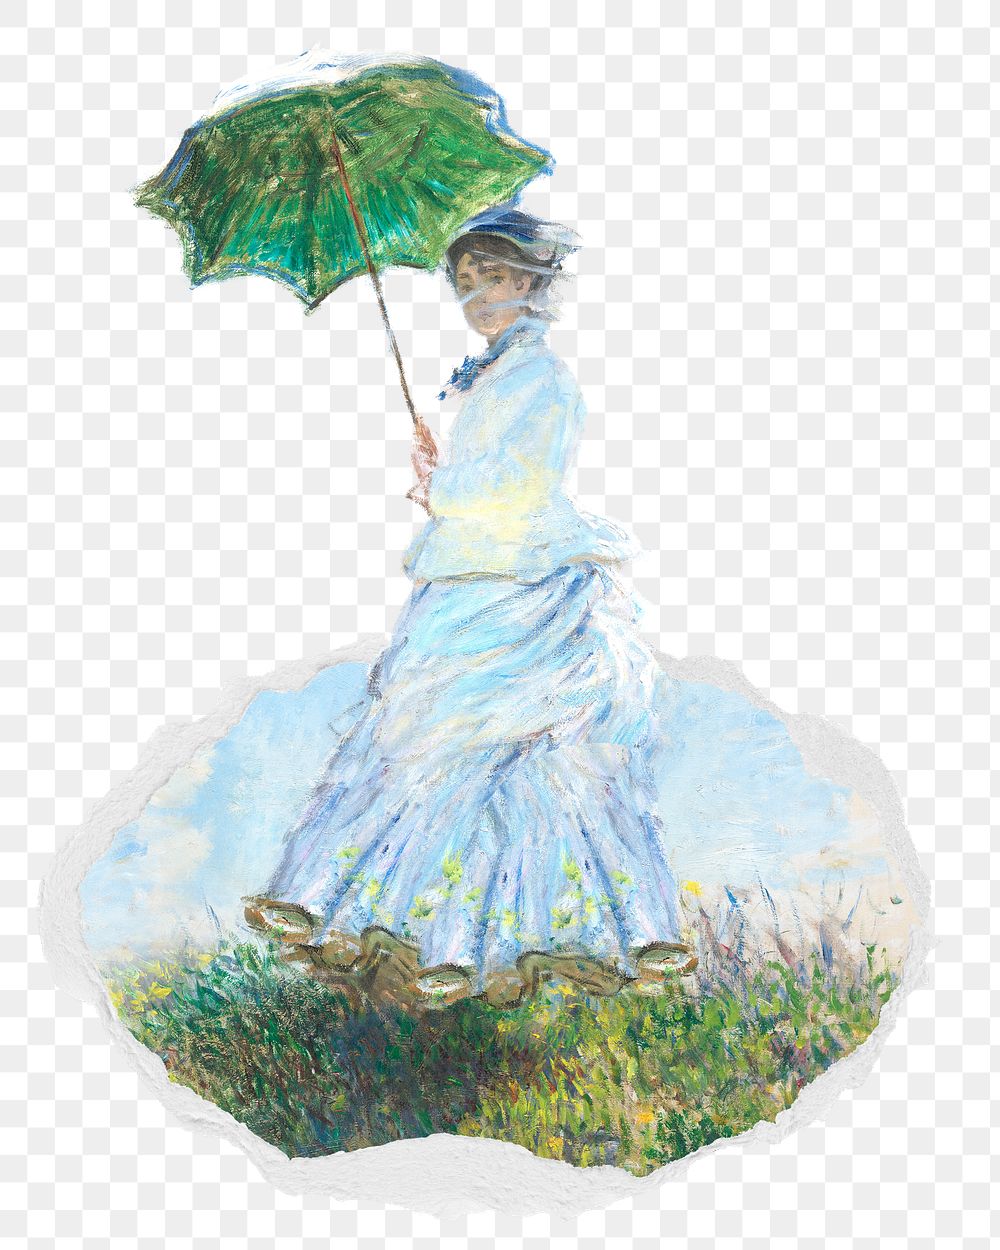 Png Woman with a Parasol sticker, Claude Monet painting in torn paper badge, transparent background, remixed by rawpixel 